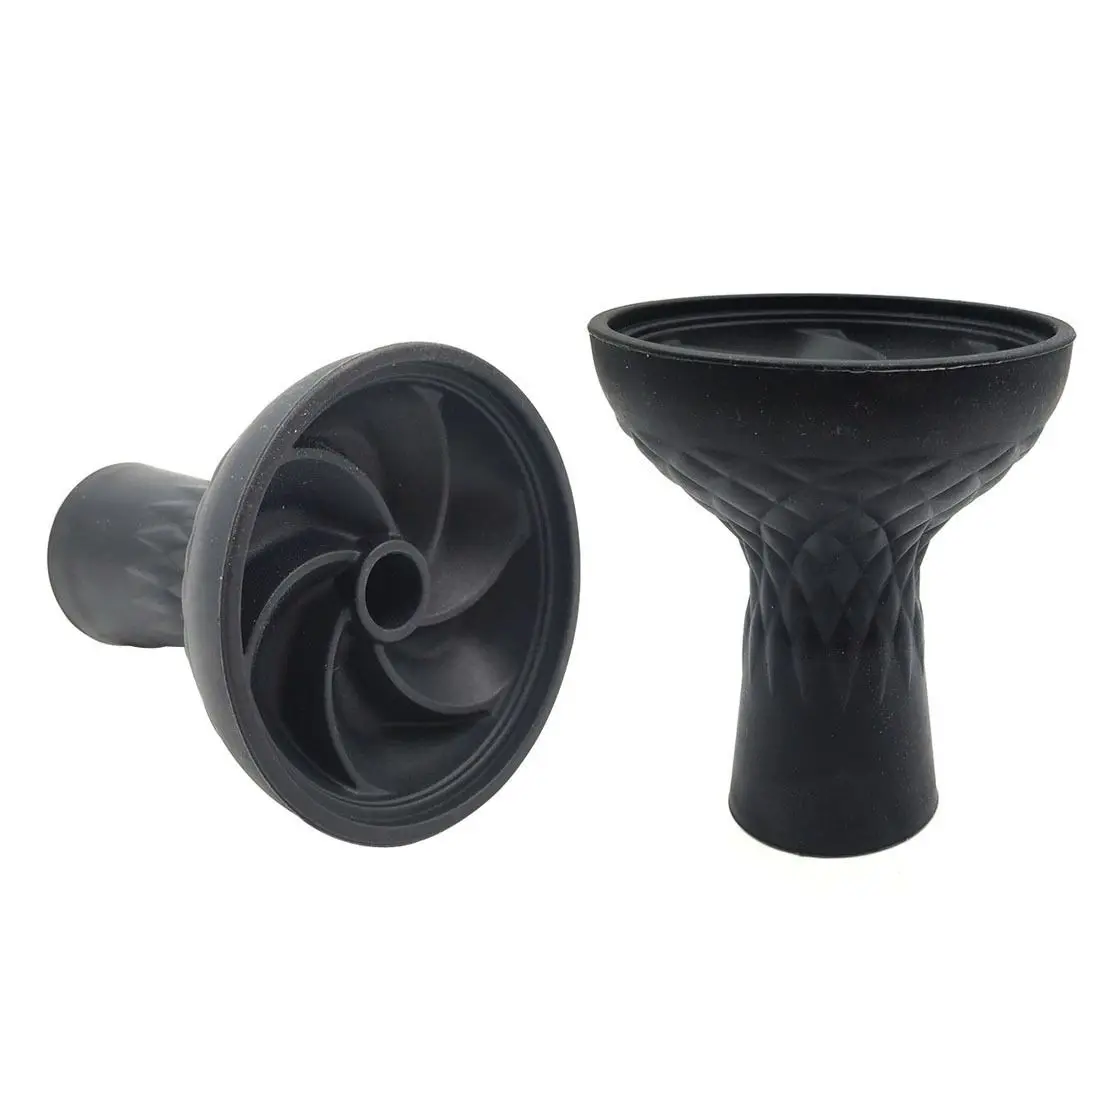 

Silicone Hookah Bowl One Hole Funnel Silicon Shisha Head GEL Phunnel Narguile Holder for Charcoal Holder Tobacco Burner, Black